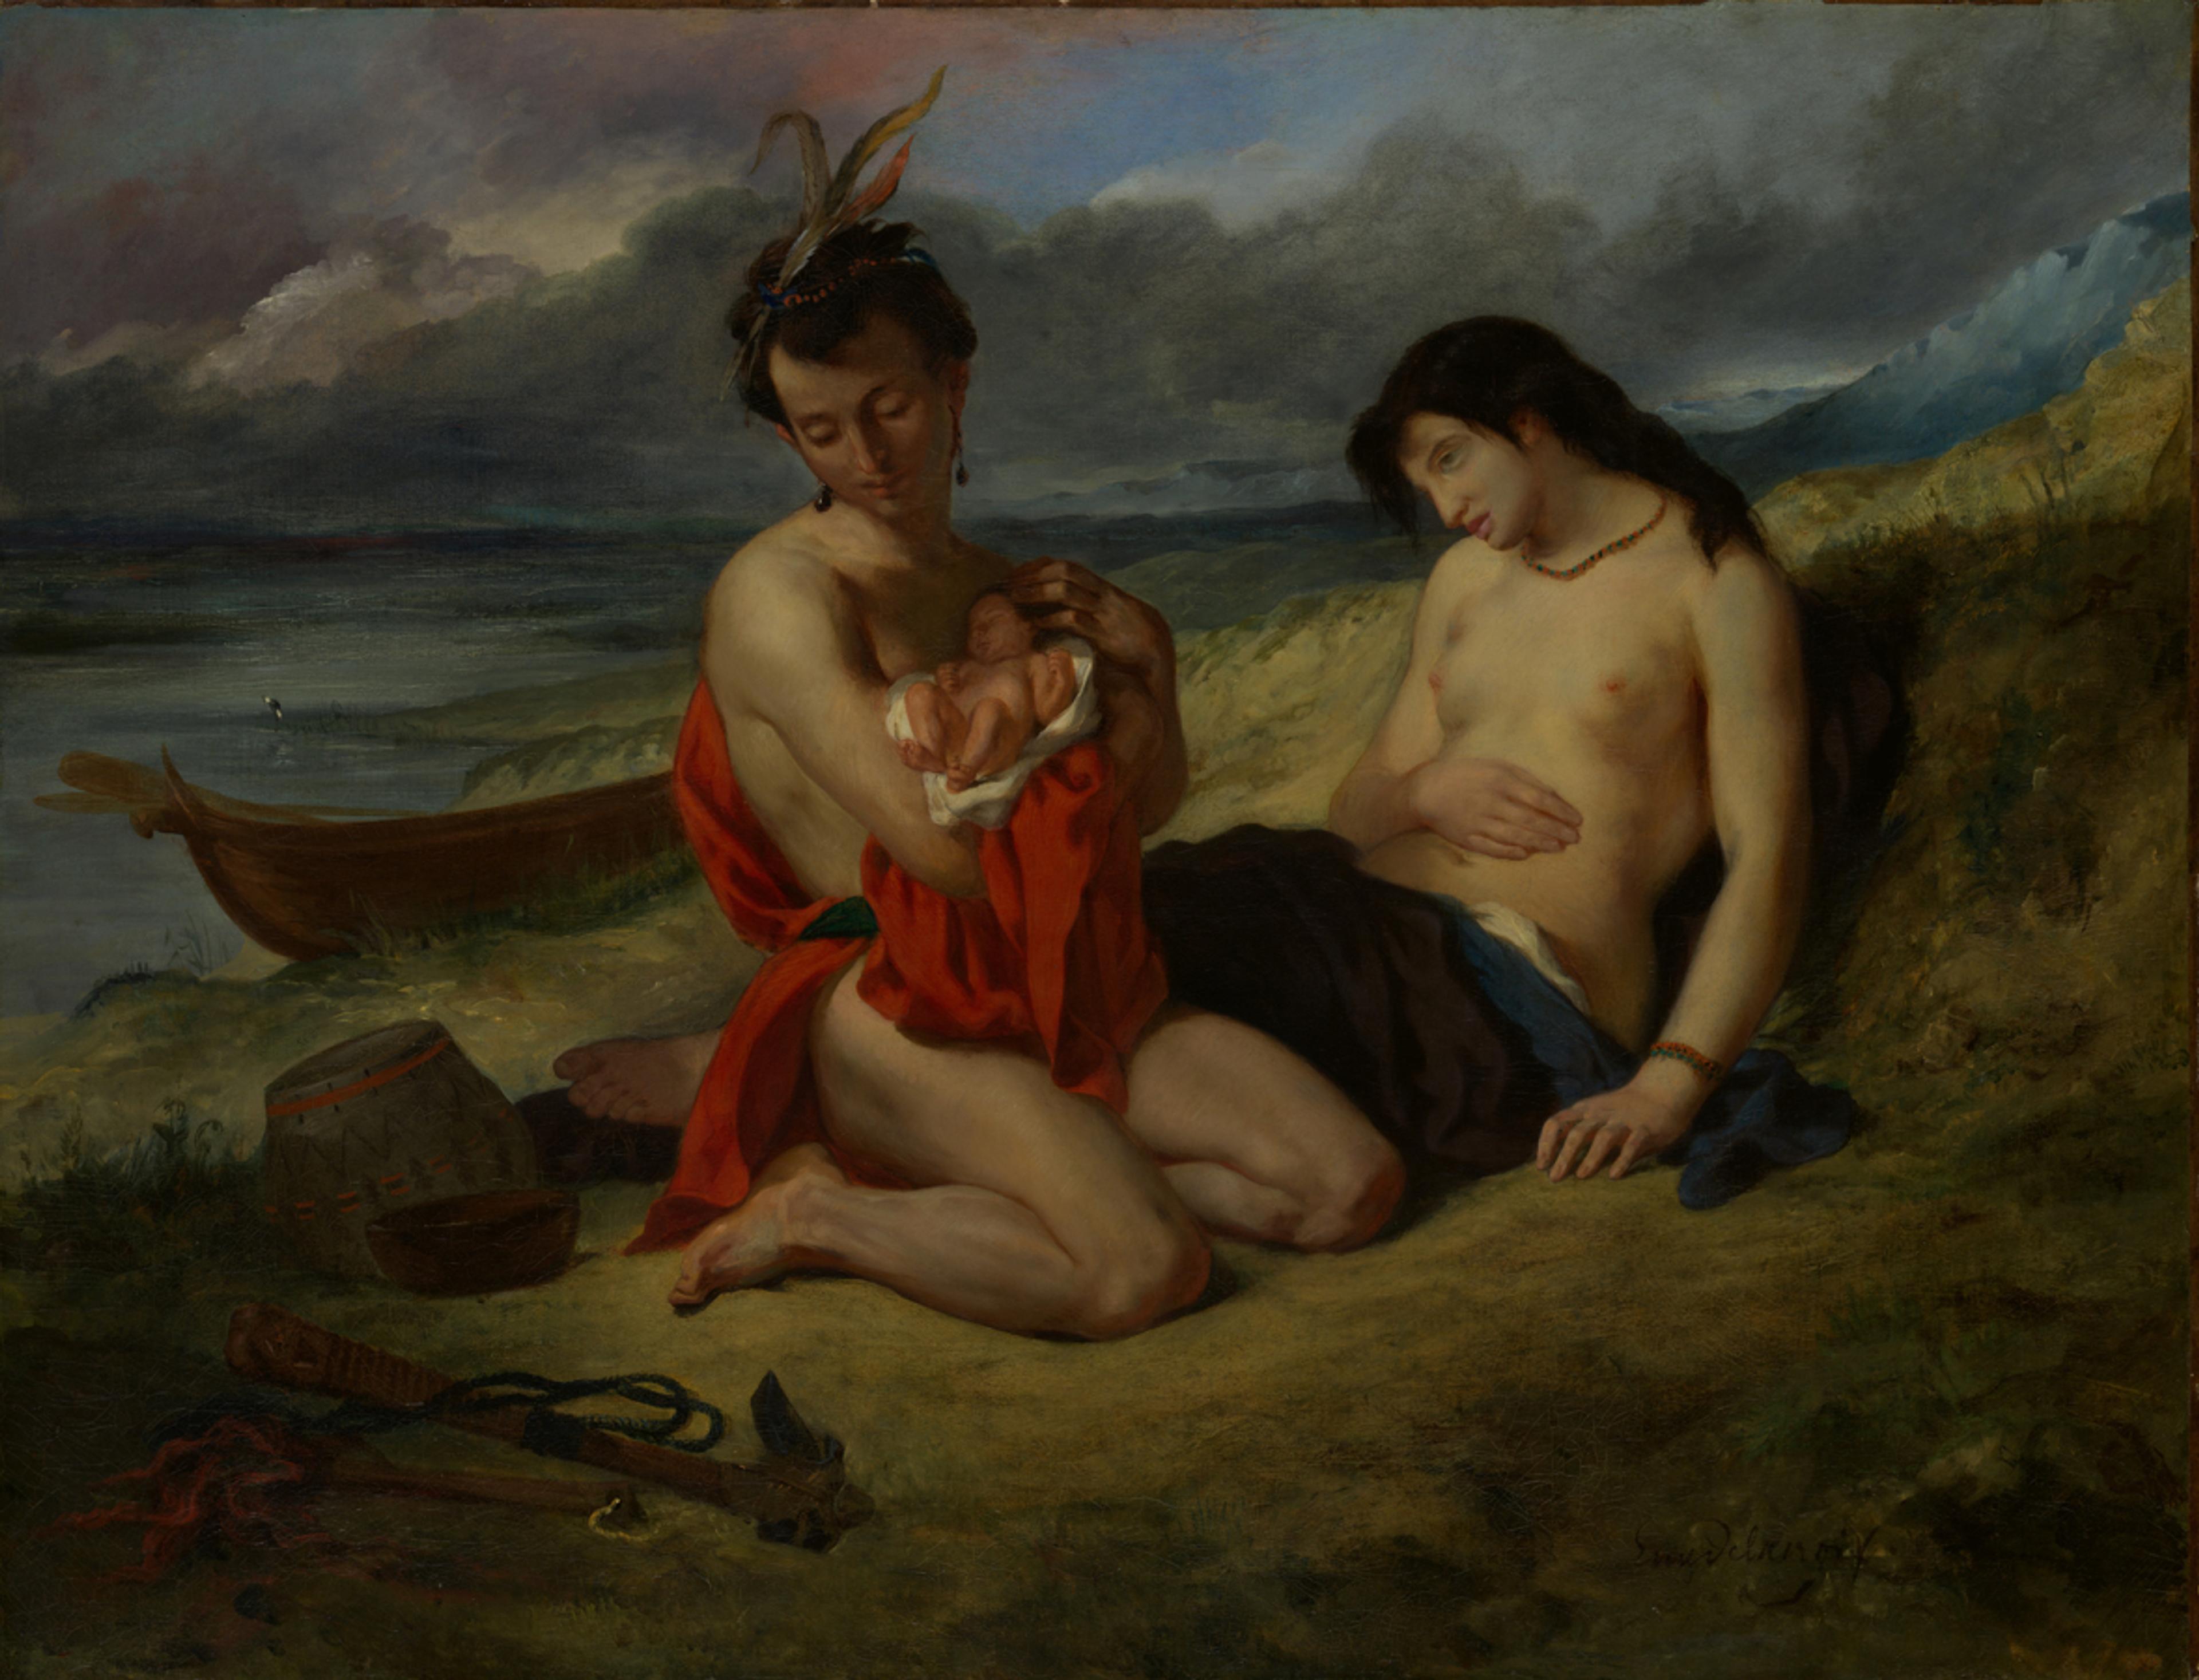 A 19th-century painting of two people on a beach with a newborn baby.